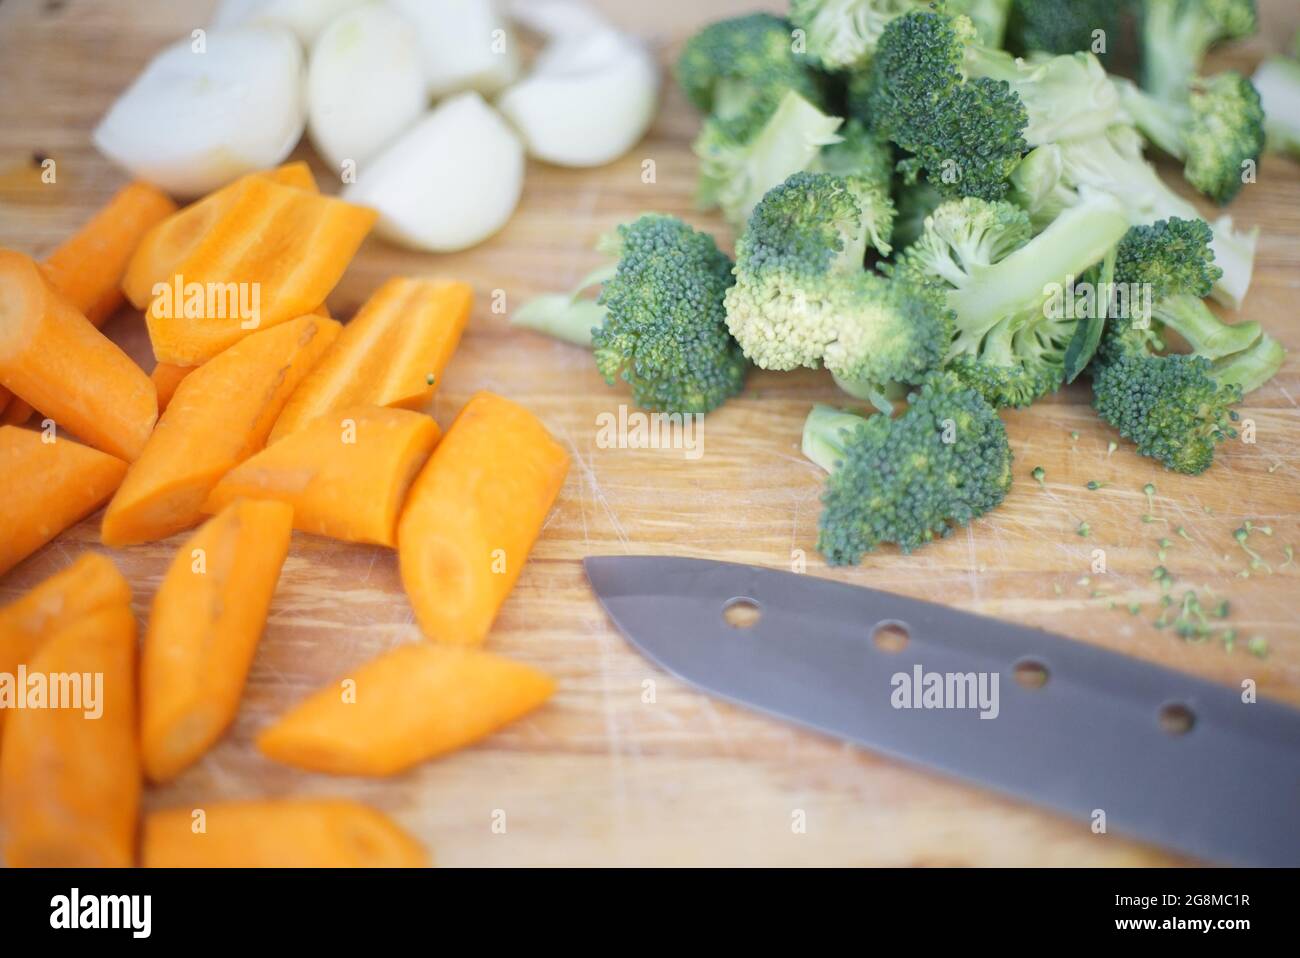 Cut vegetables on a chopping board with knife Stock Photo